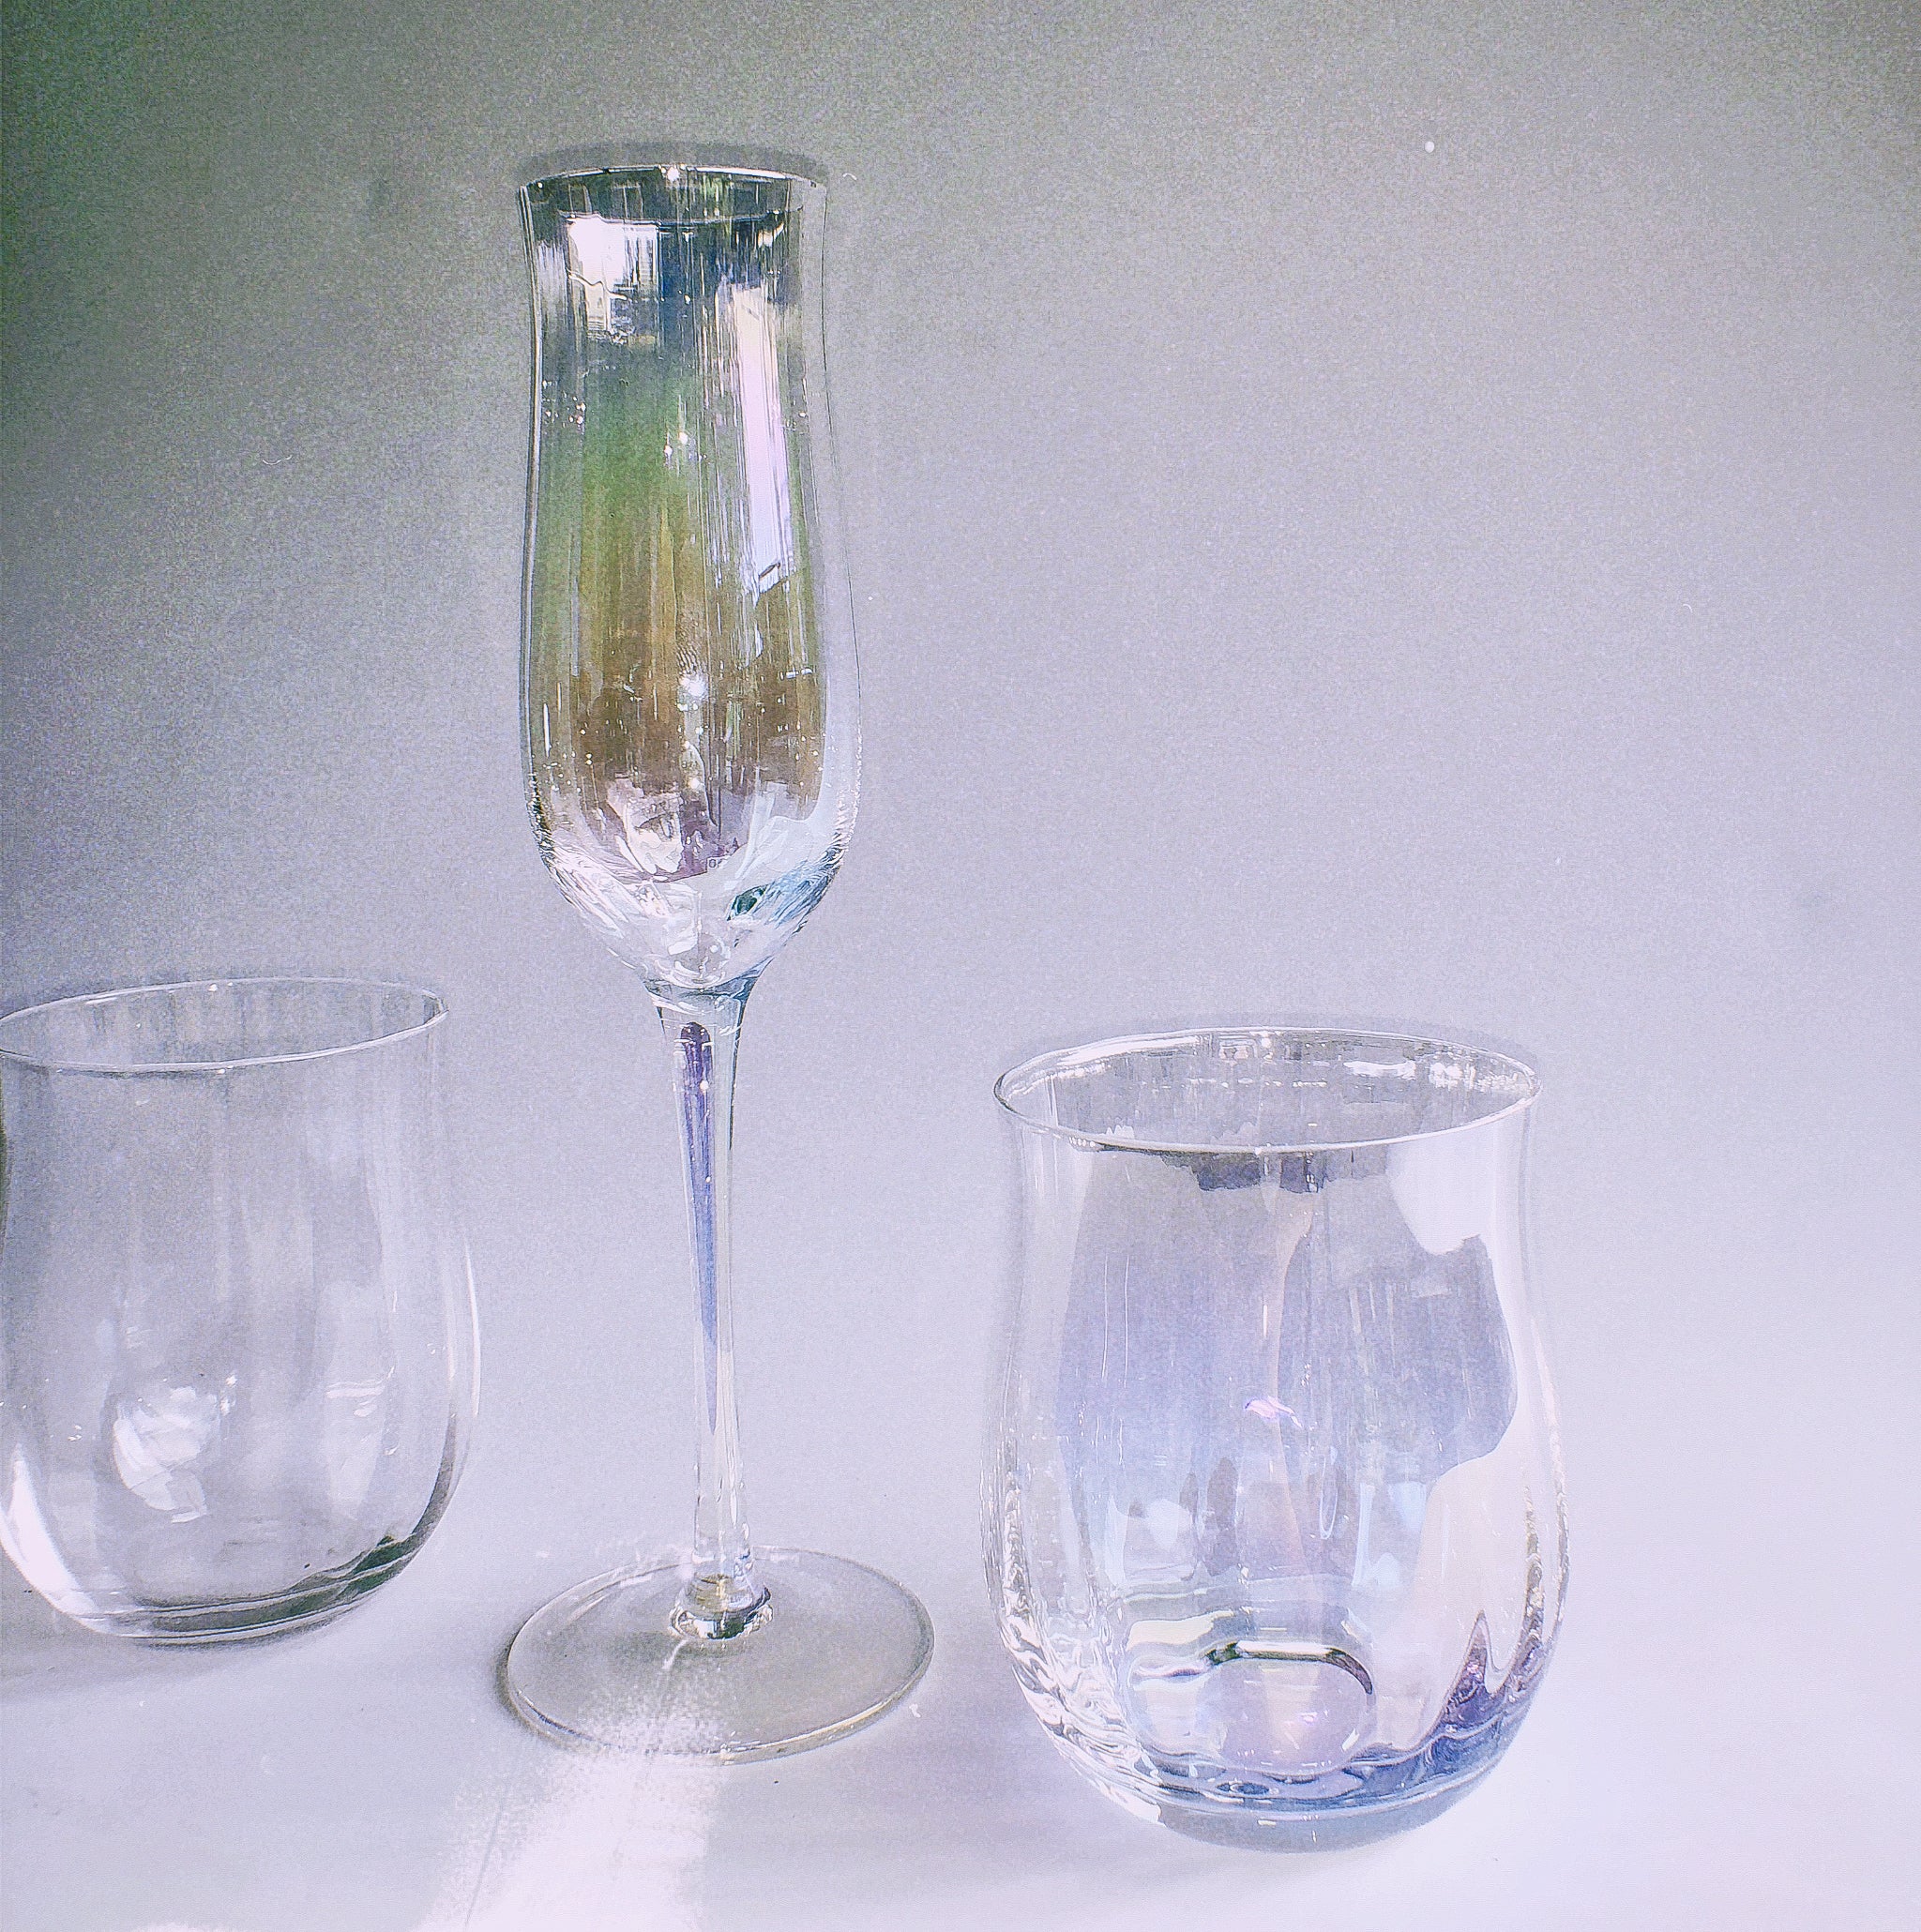 Iridescent Ripple Water Glass by PROSE Tabletop